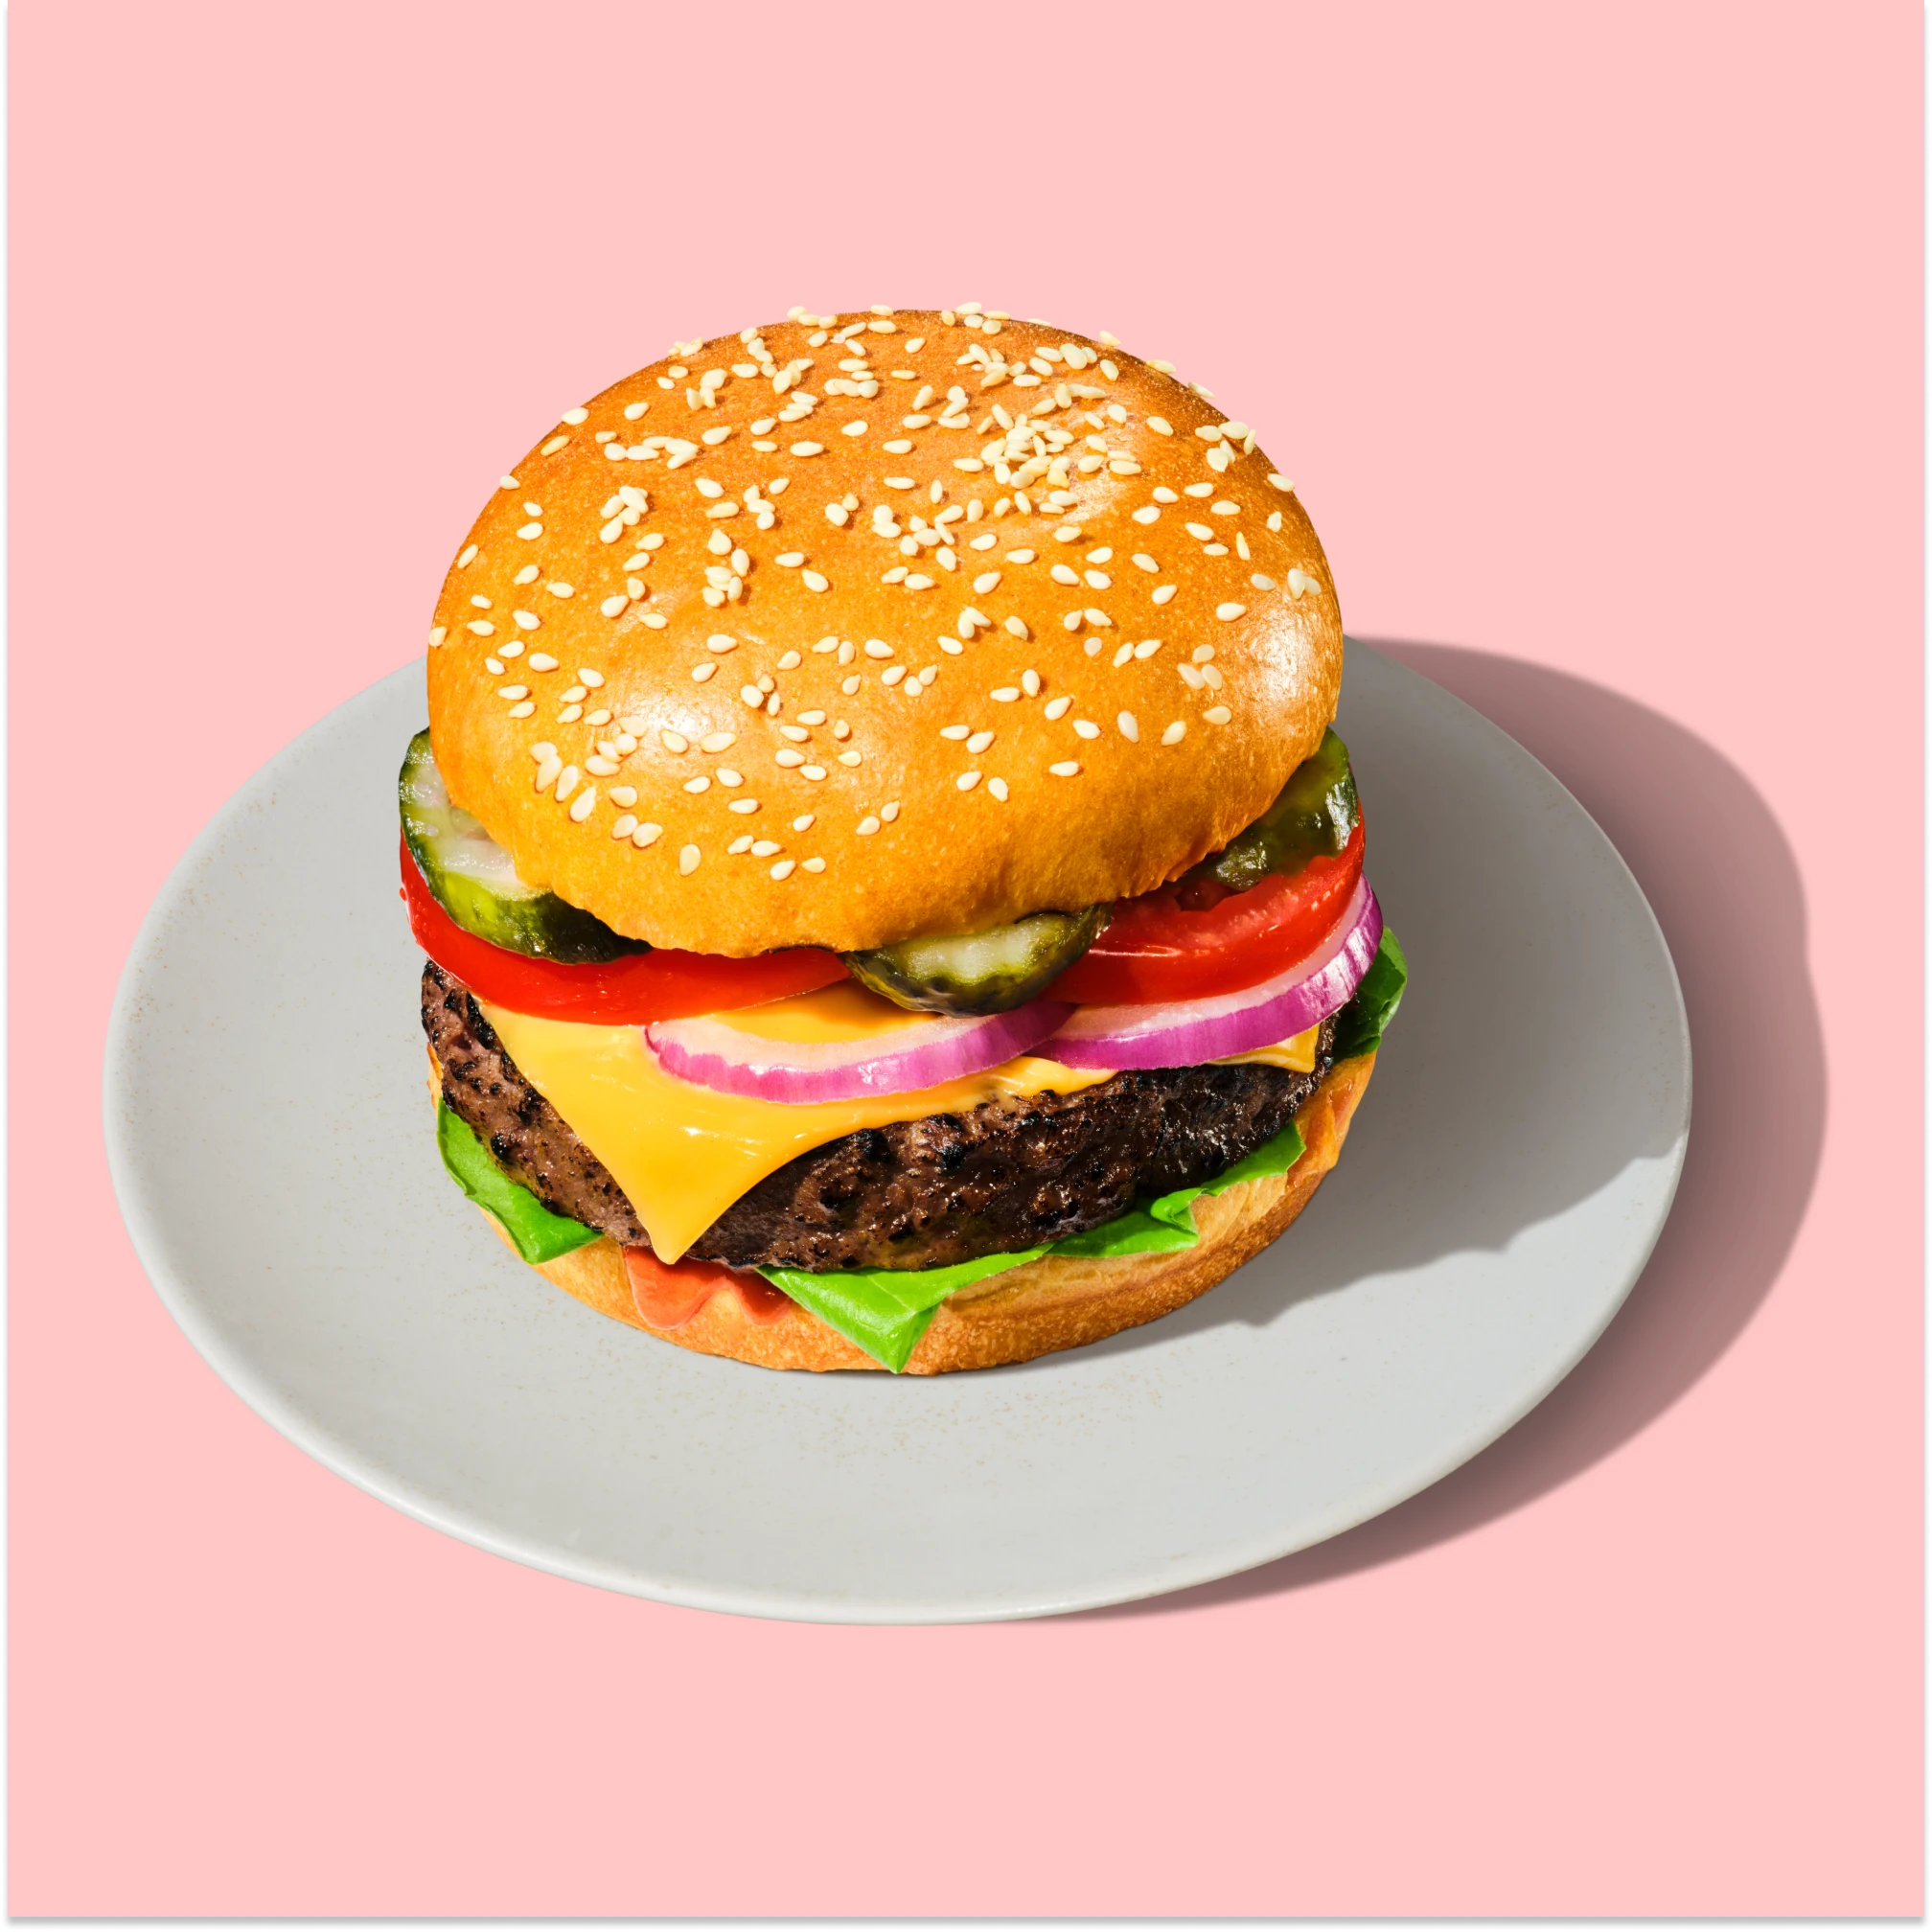 Impossible burger on a plate